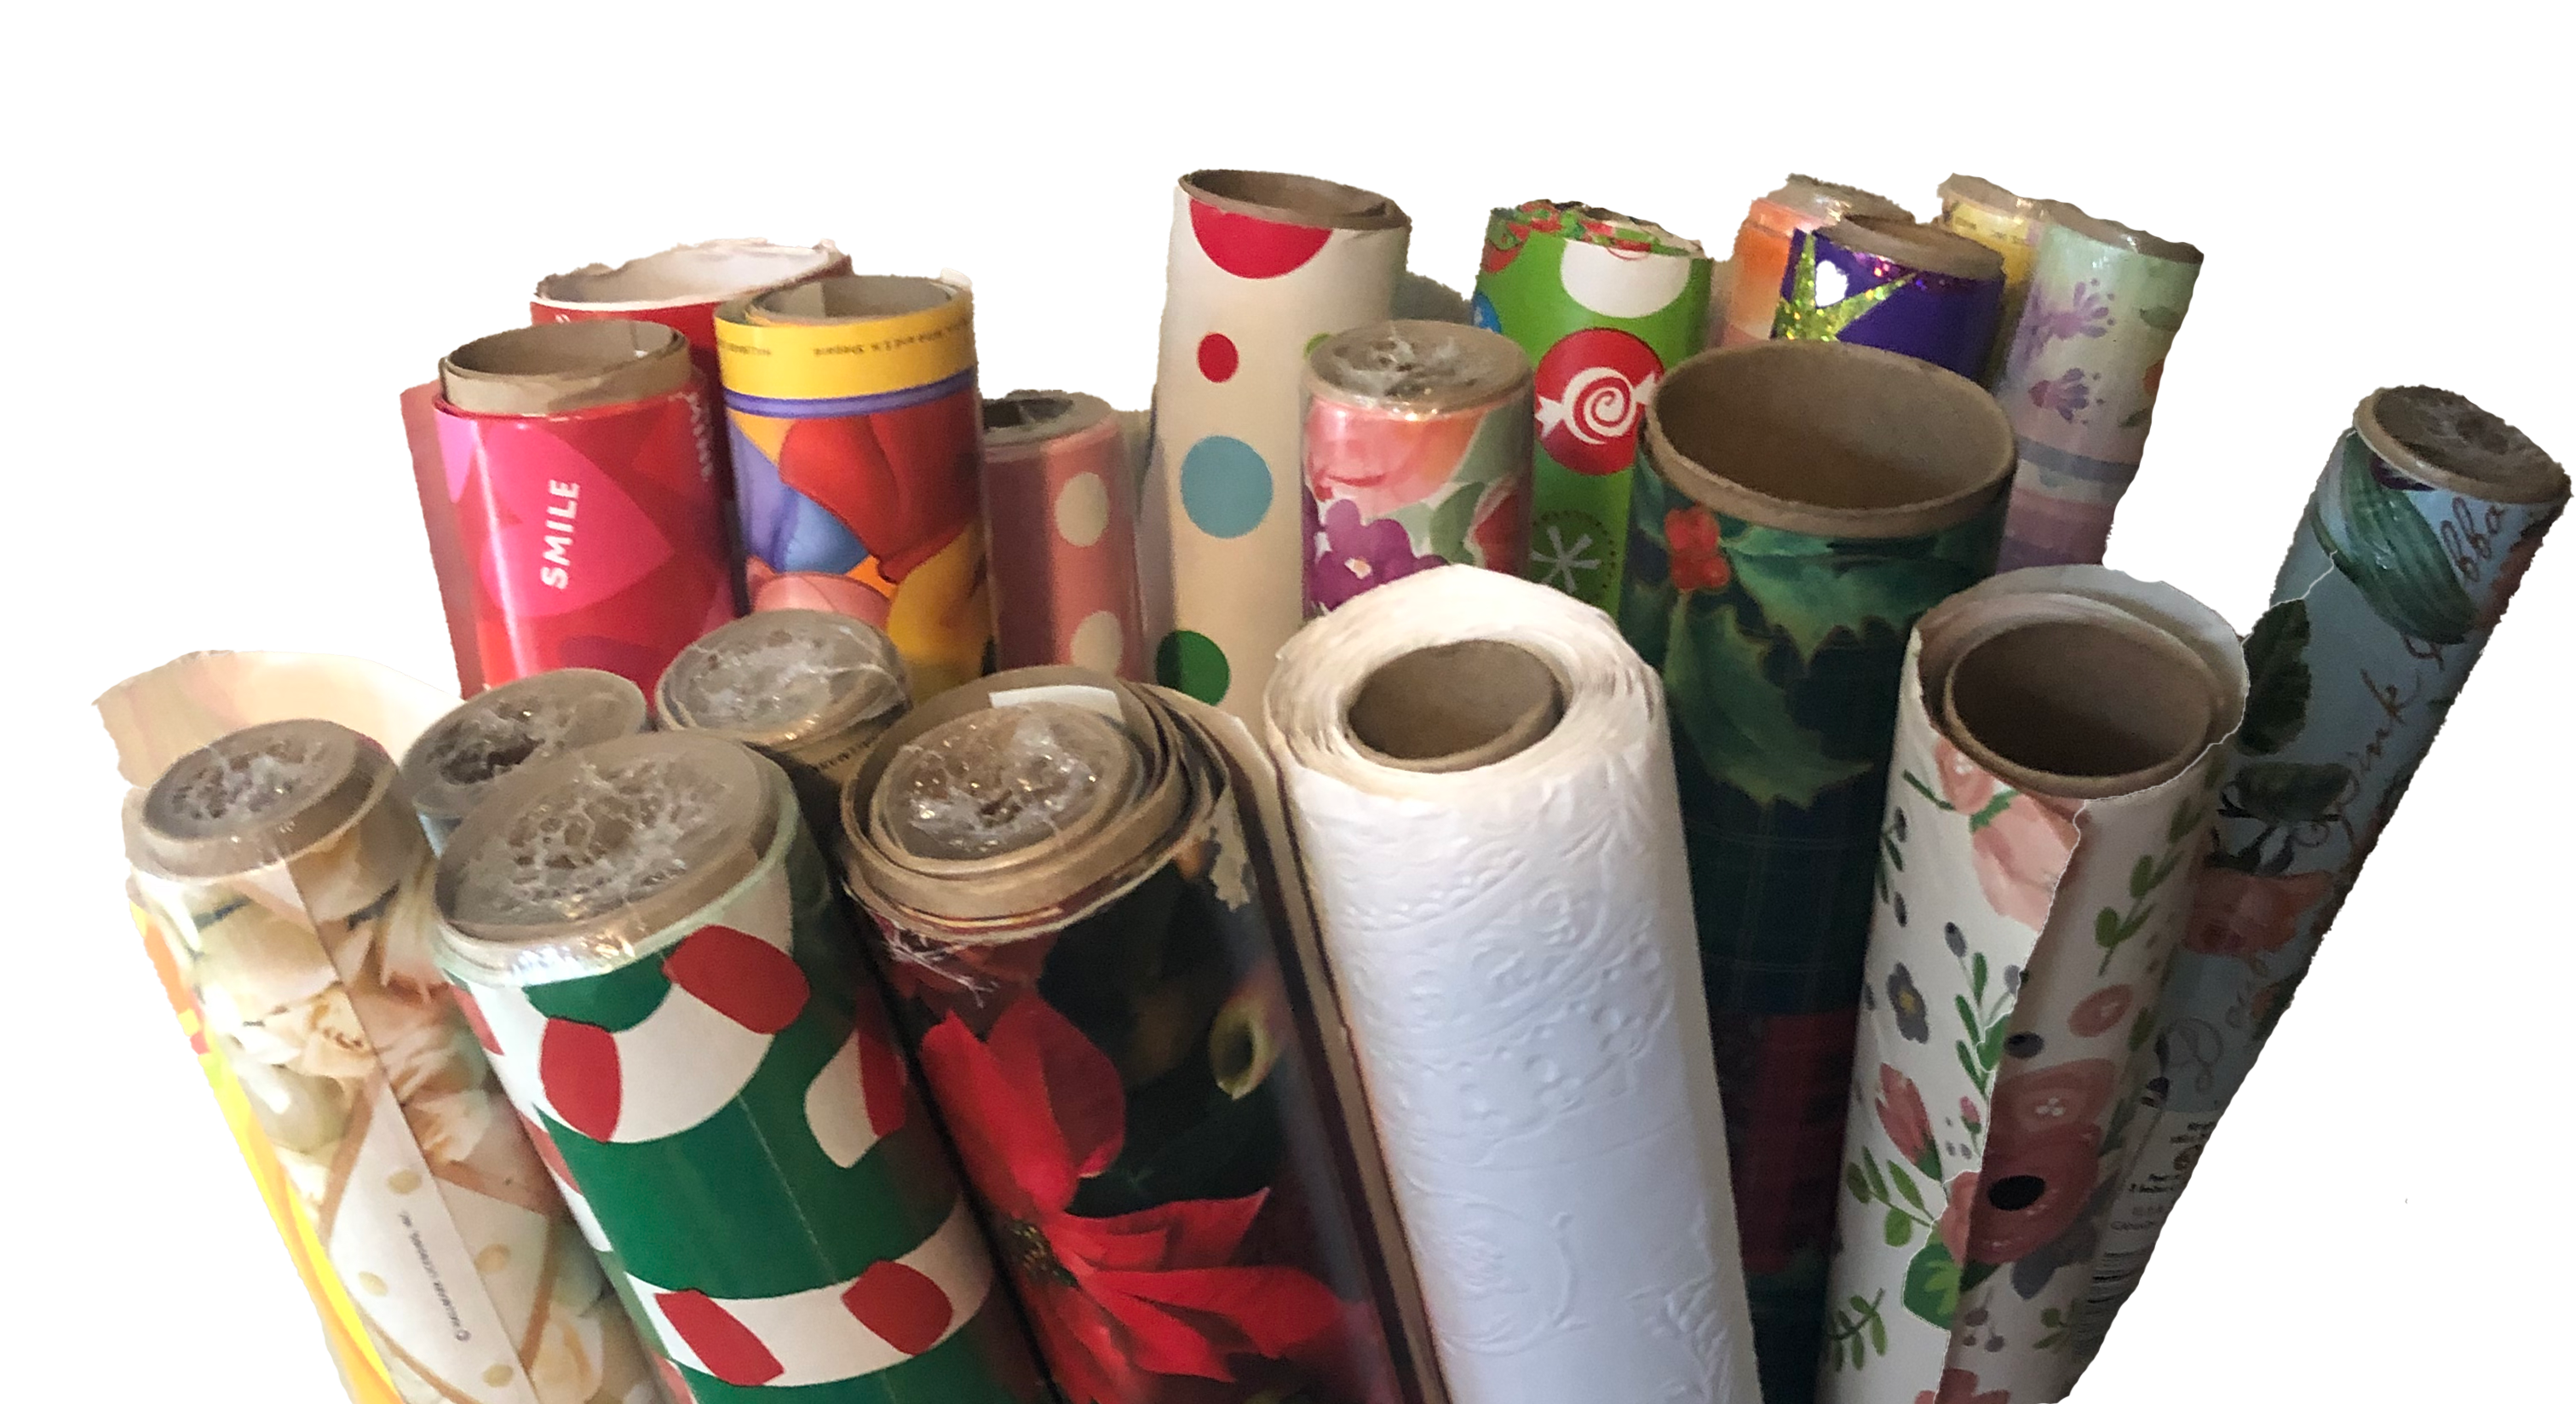 Group of wrapping paper tubes